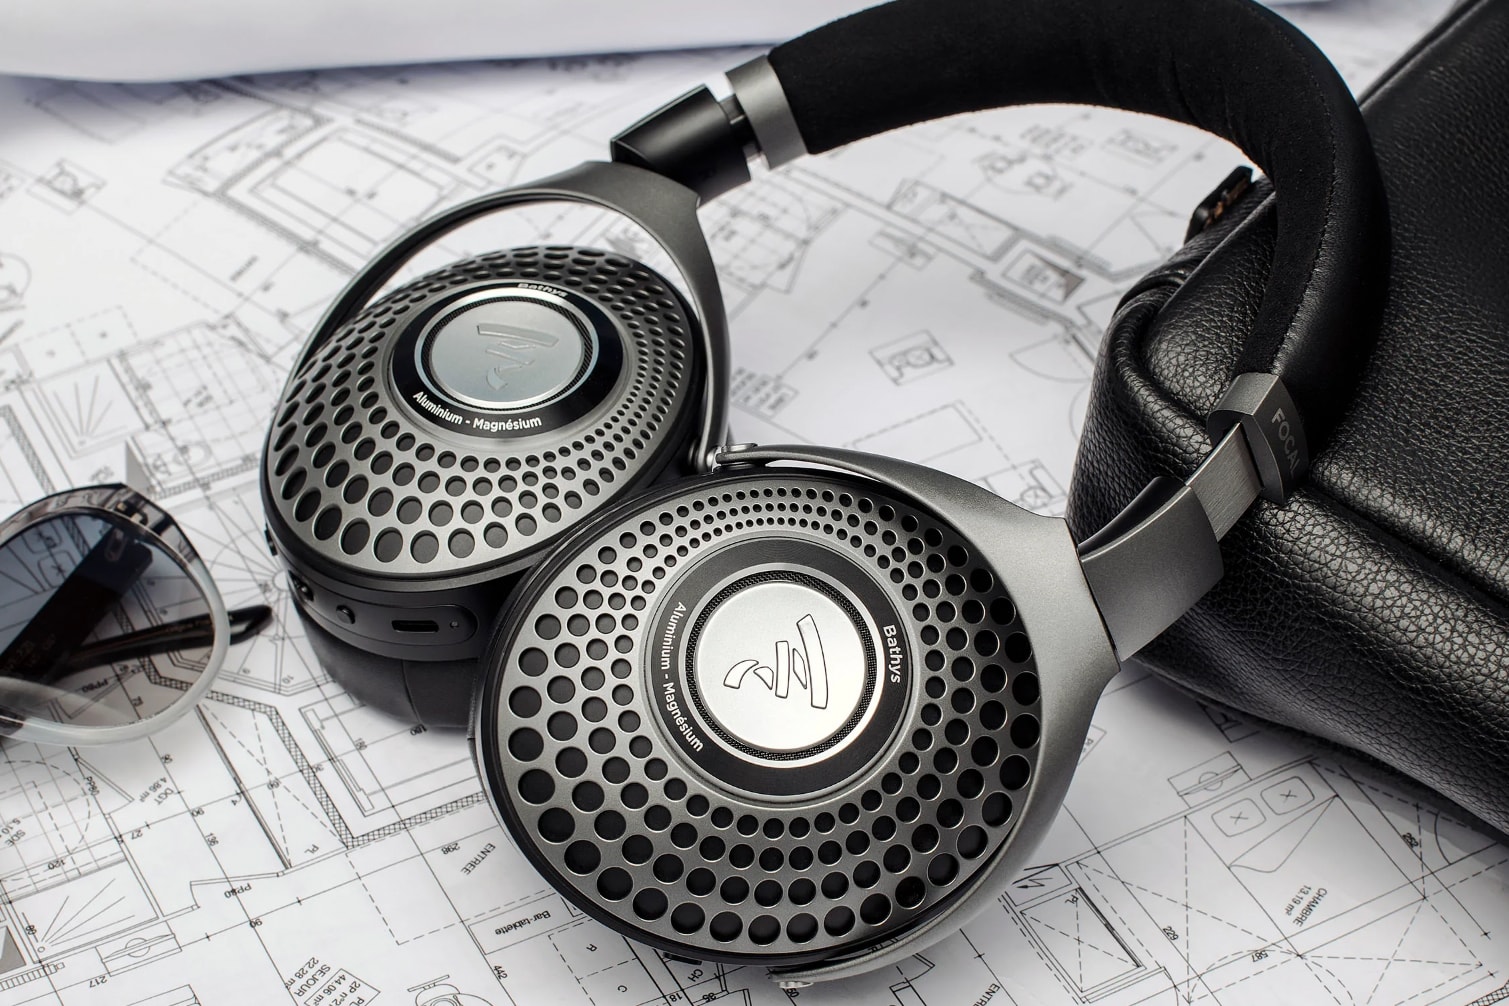 focal bathys Wireless noise-cancelling headphones release ANC